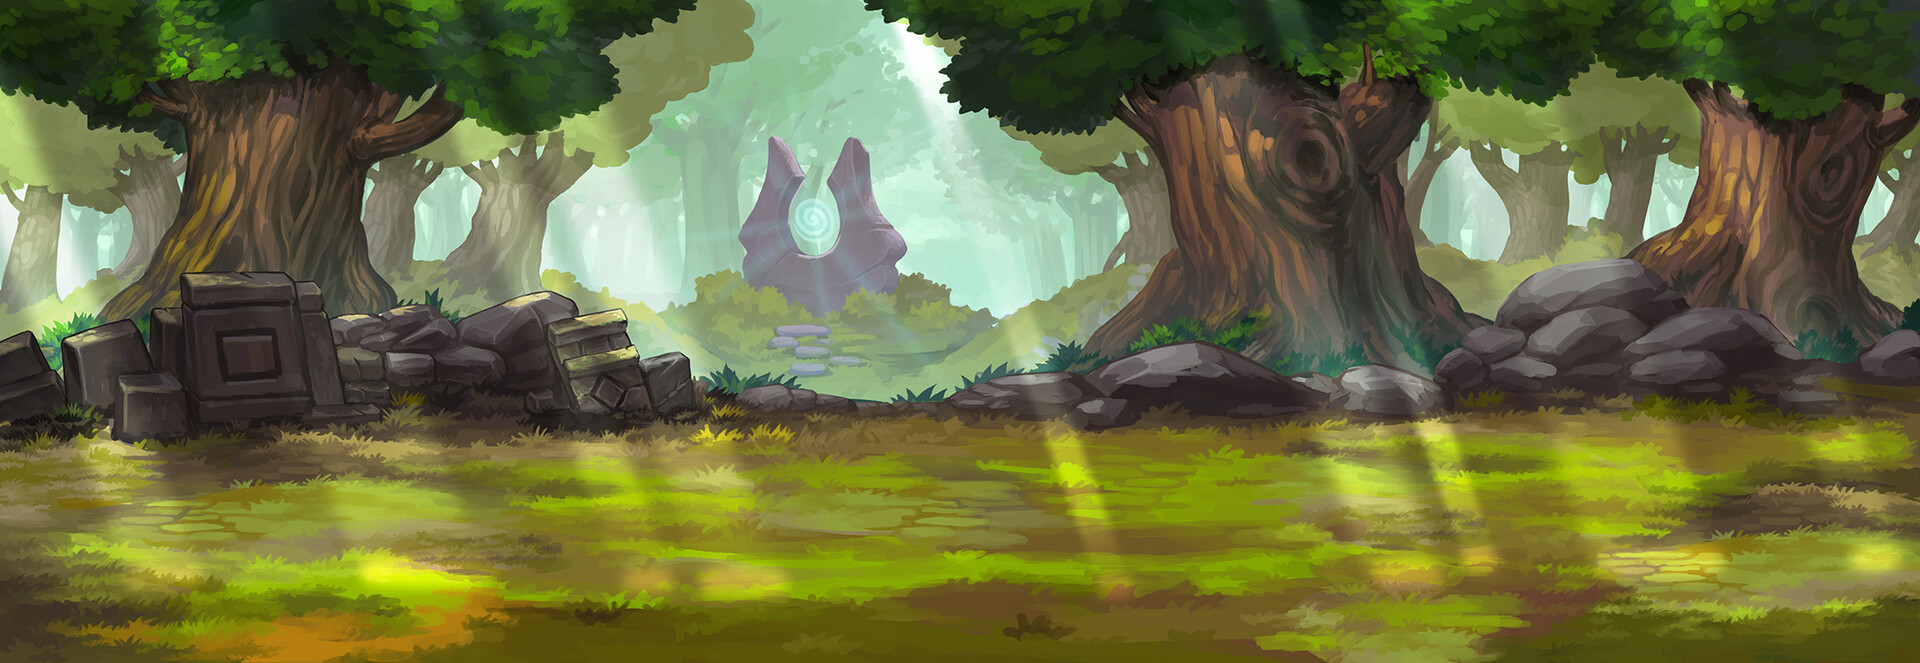 2d game background jungle